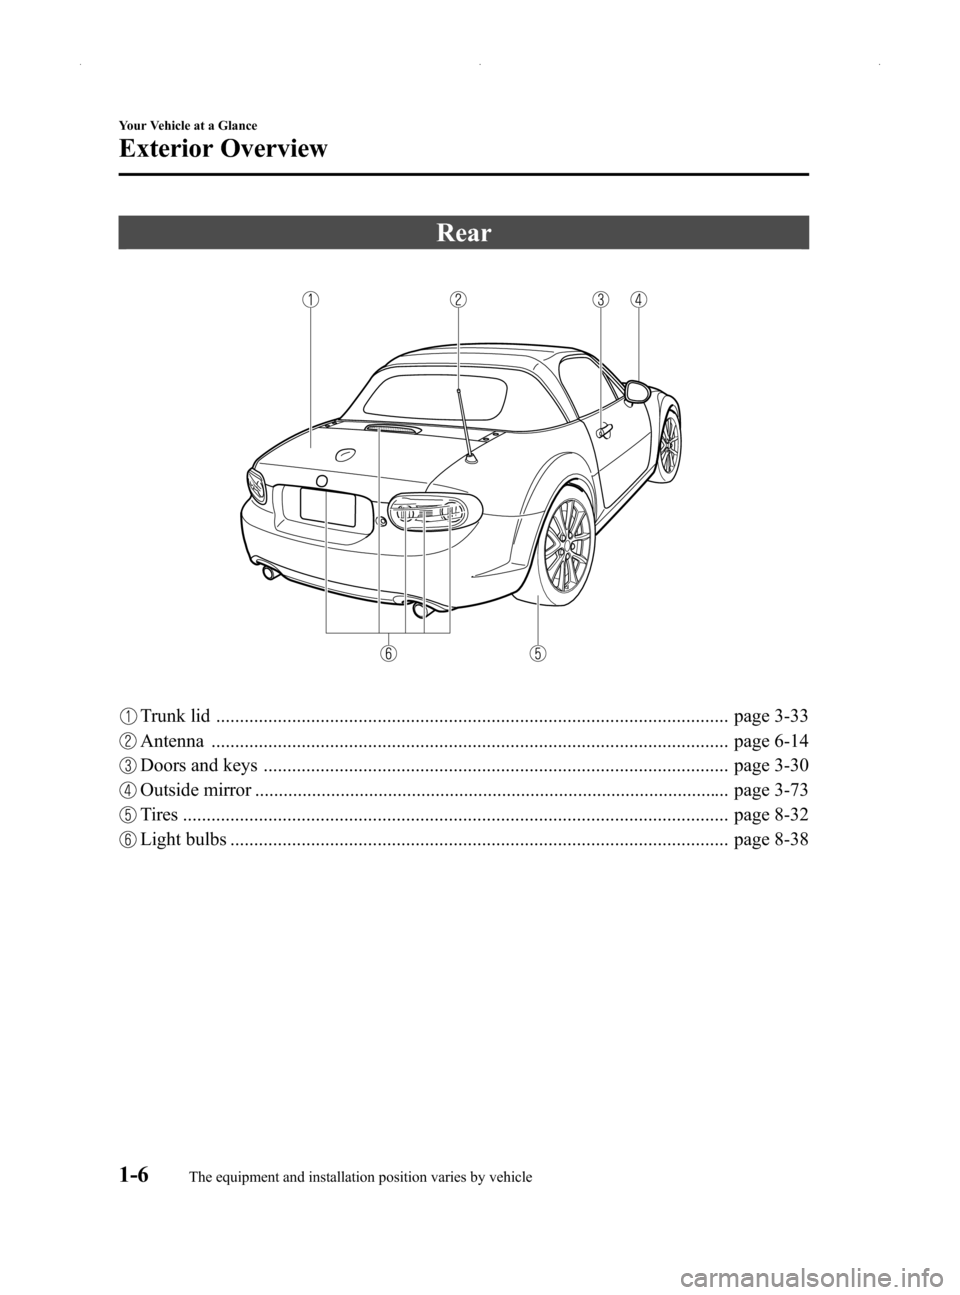 MAZDA MODEL MX-5 2014   (in English) User Guide Black plate (12,1)
Rear
Trunk lid ............................................................................................................ page 3-33
Antenna .......................................